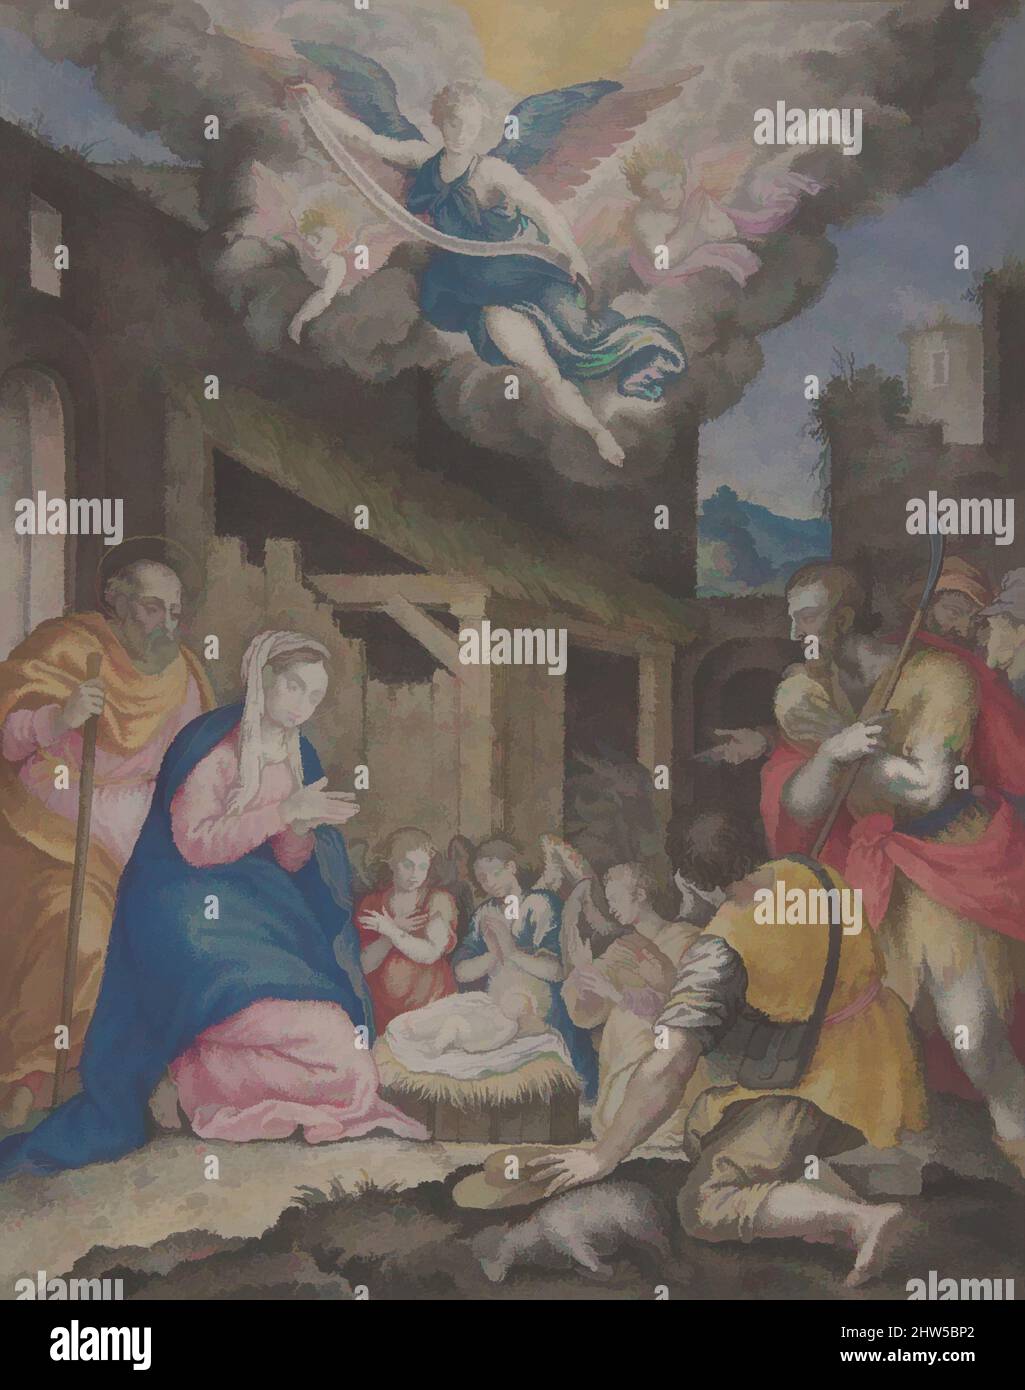 Art inspired by Adoration of the Shepherds, 1575–1600, Colored gouache on parchment, 8-11/16 x 6-7/8 in. (22 x 17.5 cm), Drawings, Anonymous, Italian, Cremonese, 16th century, Classic works modernized by Artotop with a splash of modernity. Shapes, color and value, eye-catching visual impact on art. Emotions through freedom of artworks in a contemporary way. A timeless message pursuing a wildly creative new direction. Artists turning to the digital medium and creating the Artotop NFT Stock Photo